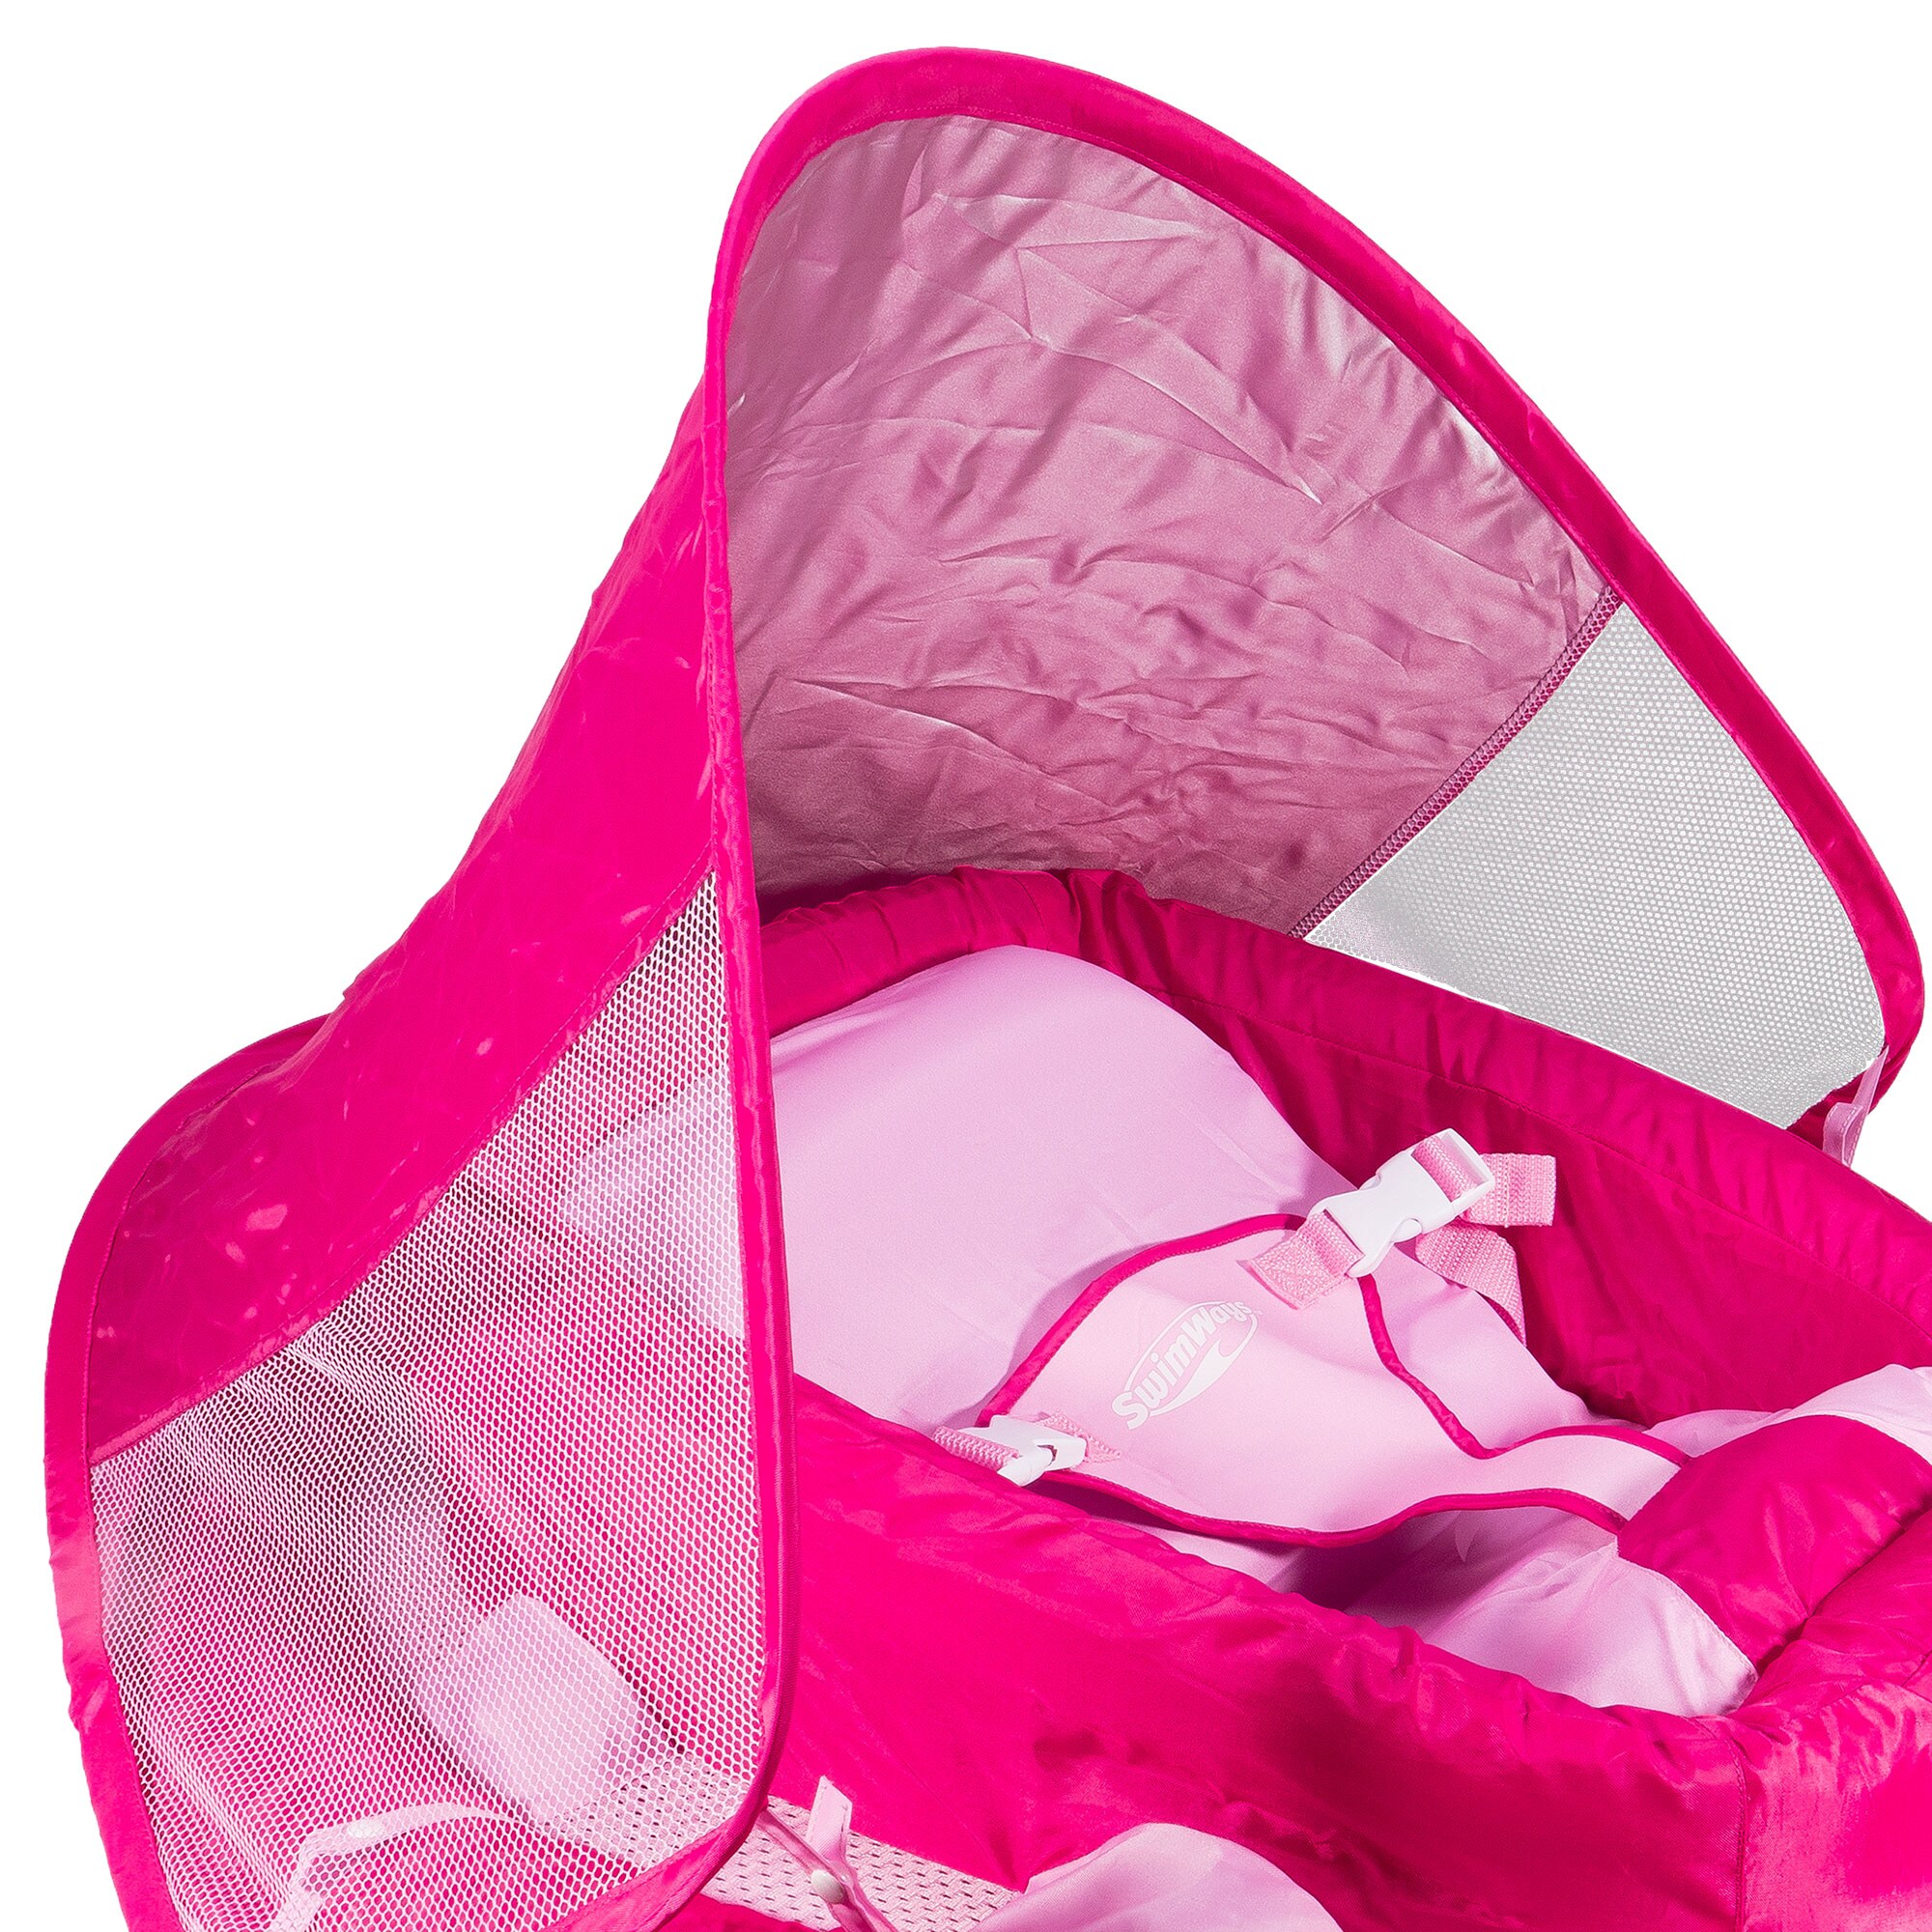 SwimWays Infant Baby Spring Float with Removable Sun Canopy - Pink